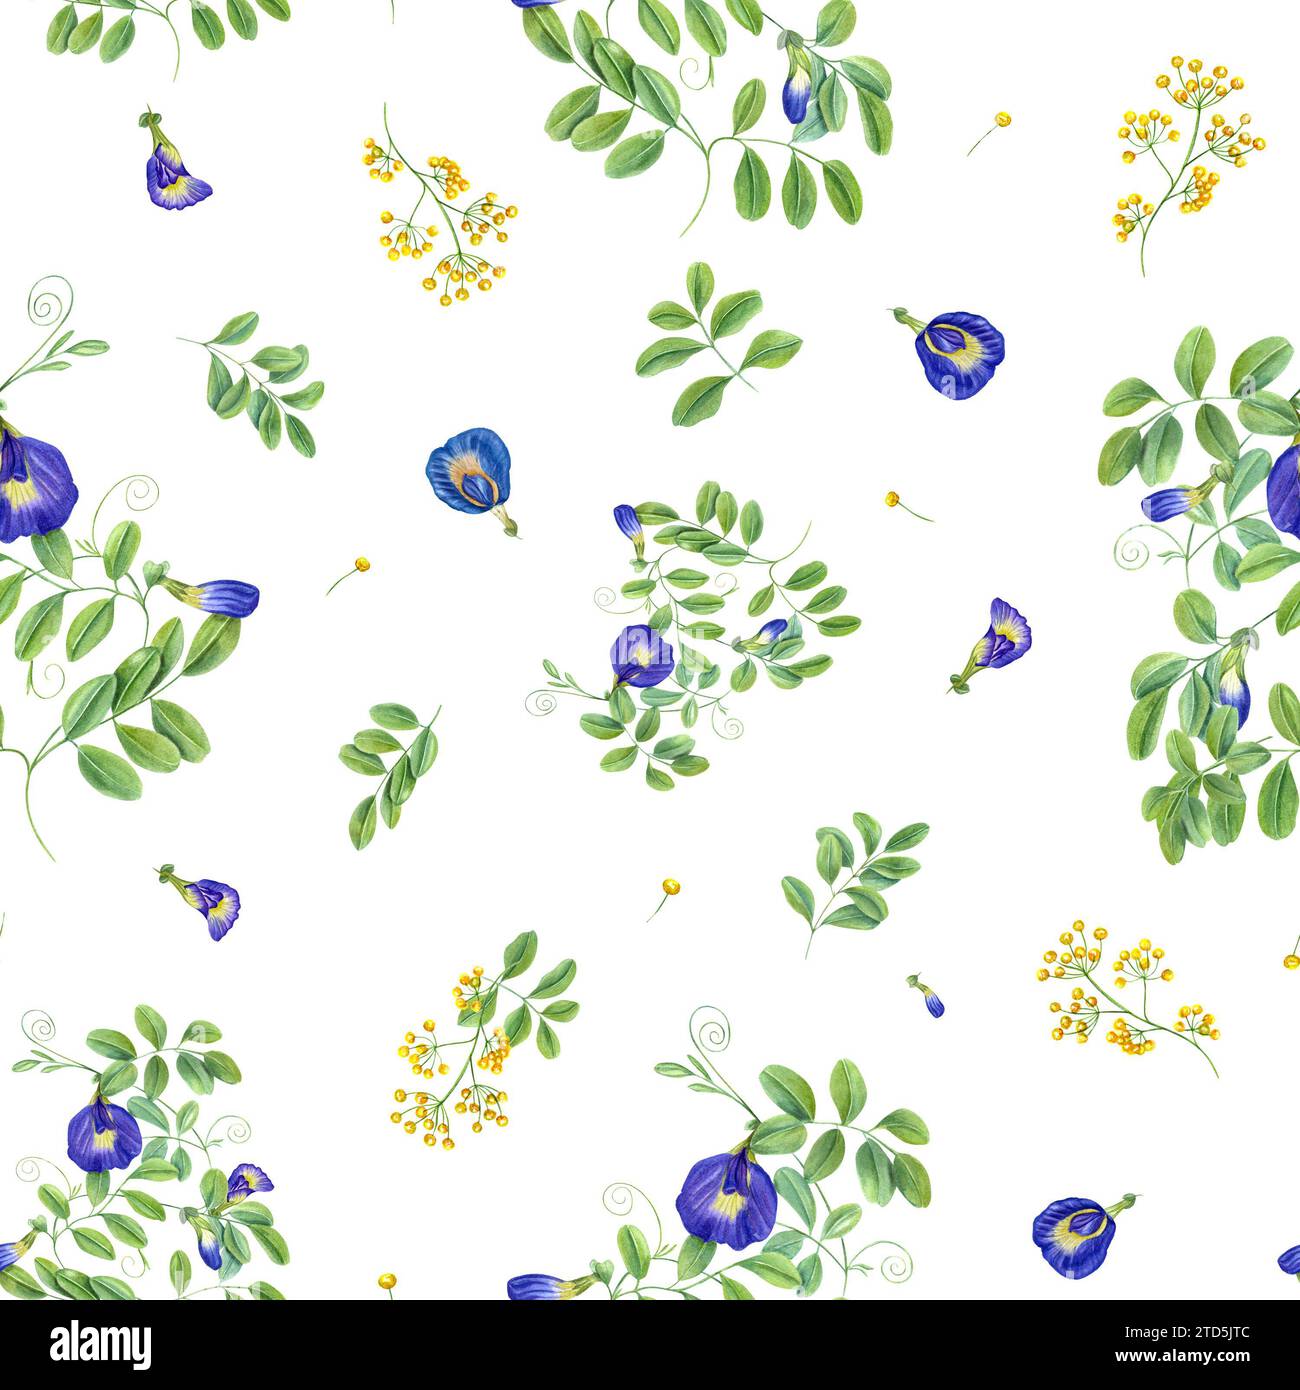 Seamless pattern with blue and yellow flowers. Thai blue flowers. Butterfly pea flowers. Tropical plant, Ipomoea, clitoria ternatea, bluebellvine. Stock Photo